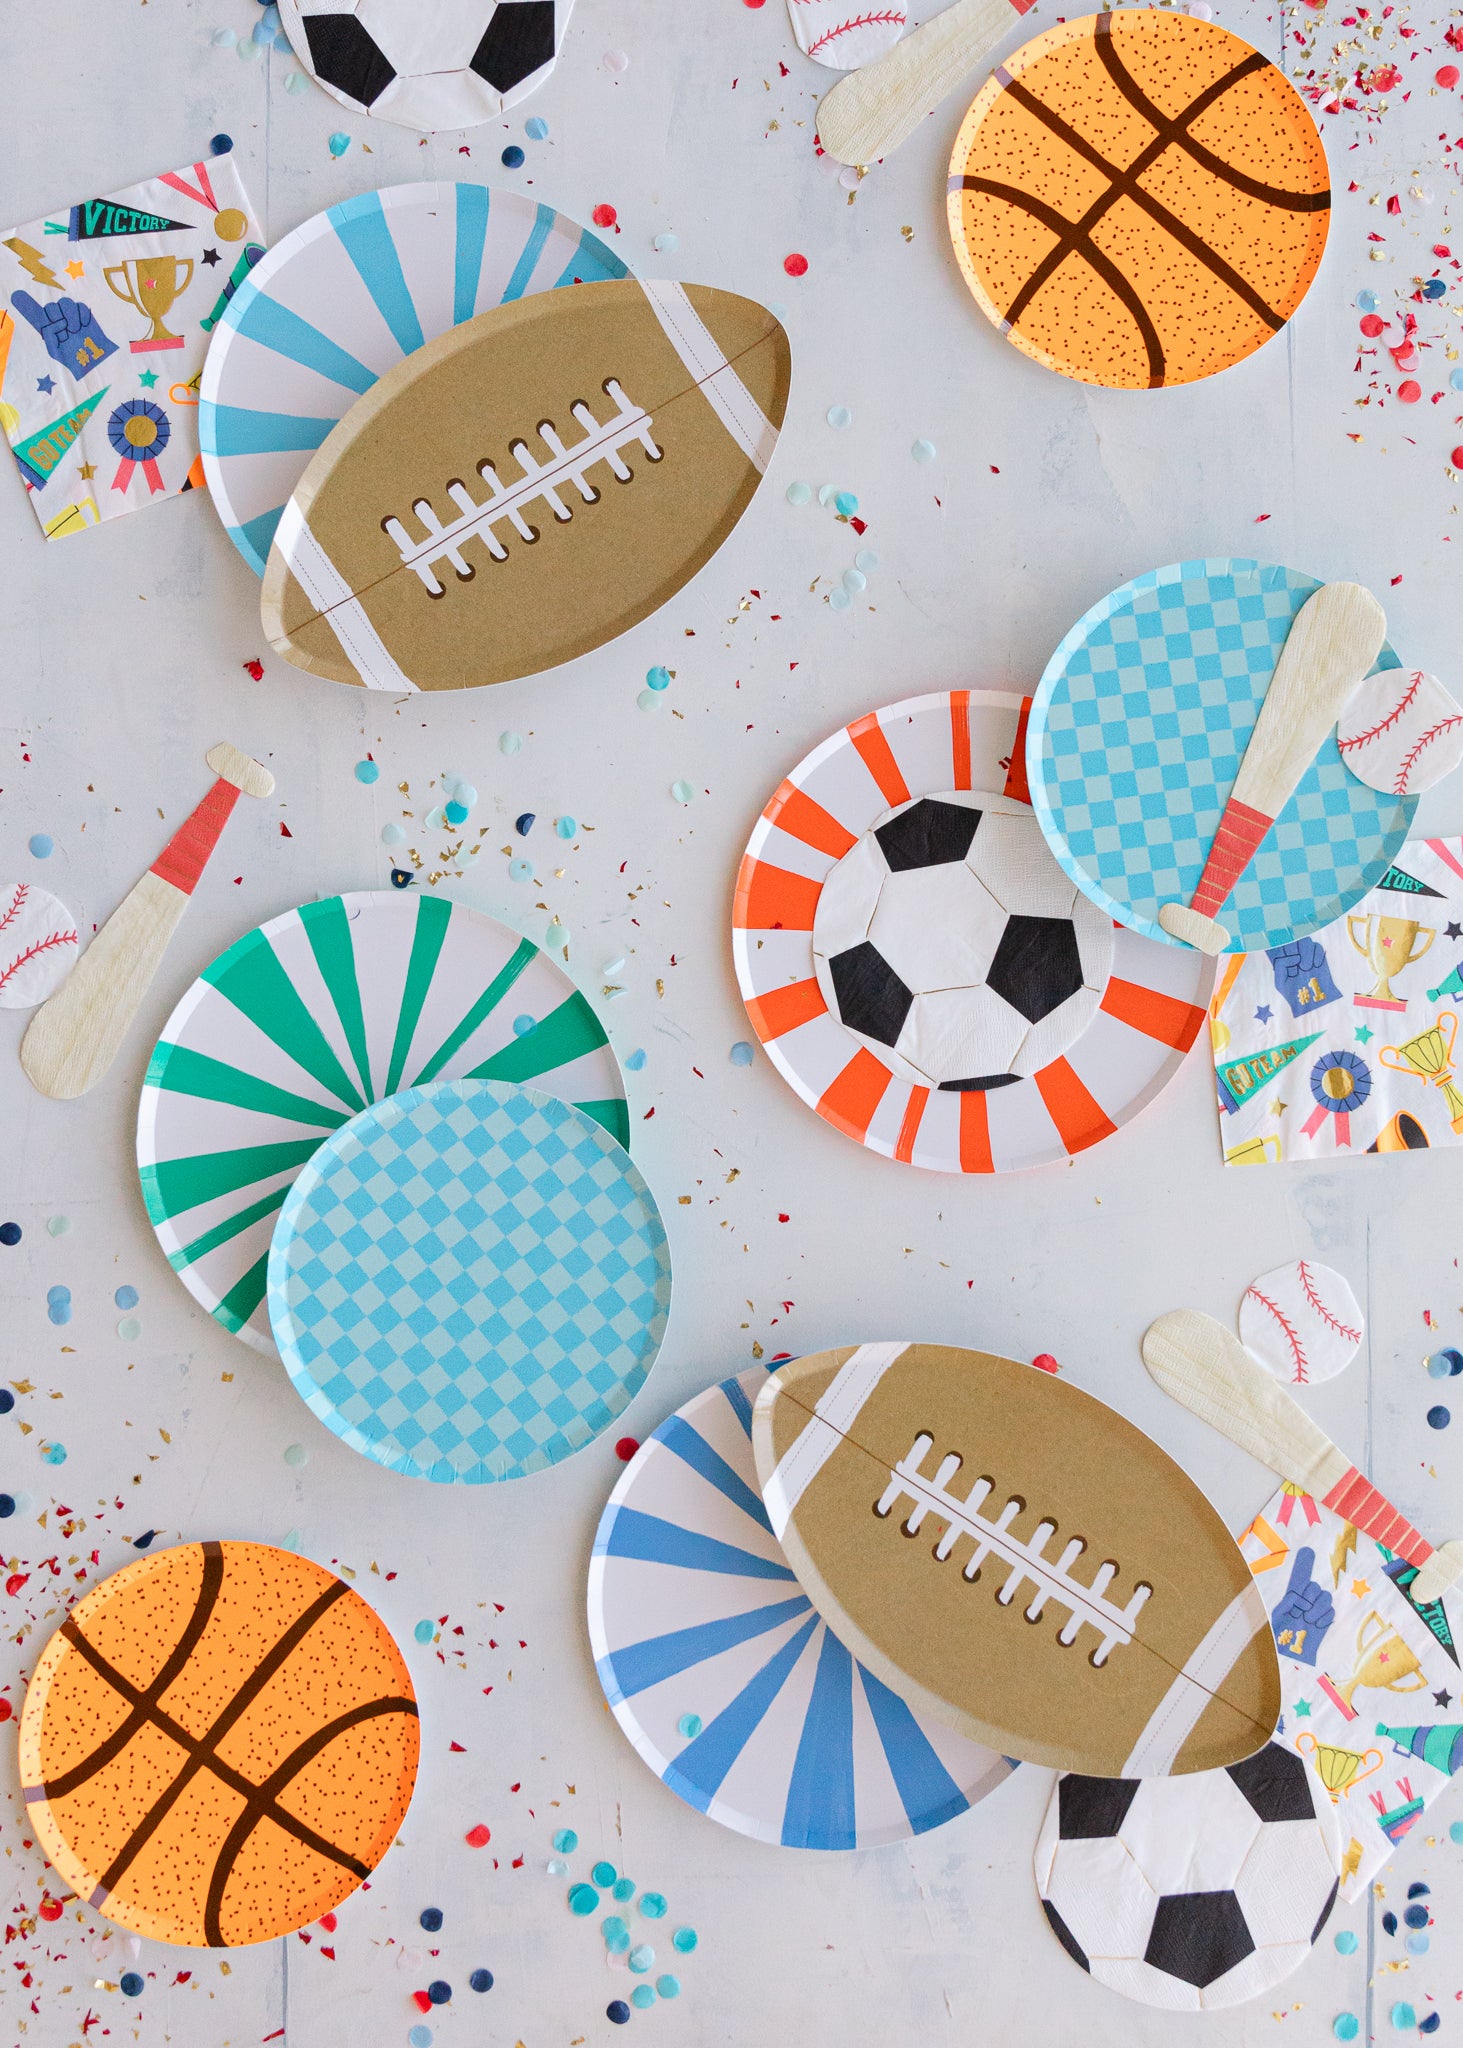 Sports party supplies for a boy's sports theme birthday party.